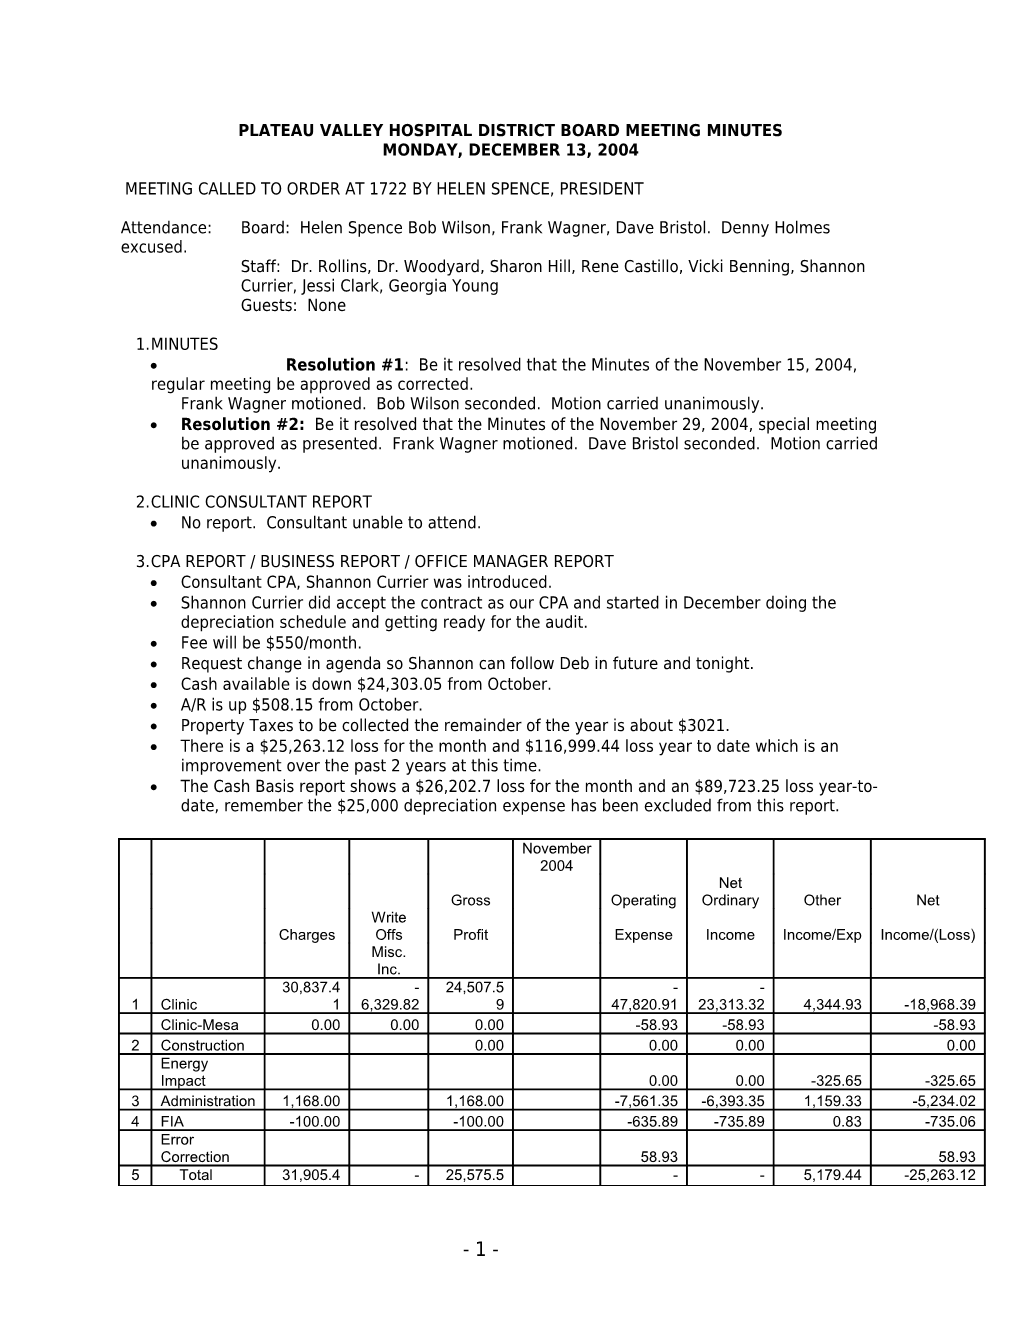 Plateau Valley Hospital District Board Meeting Notice